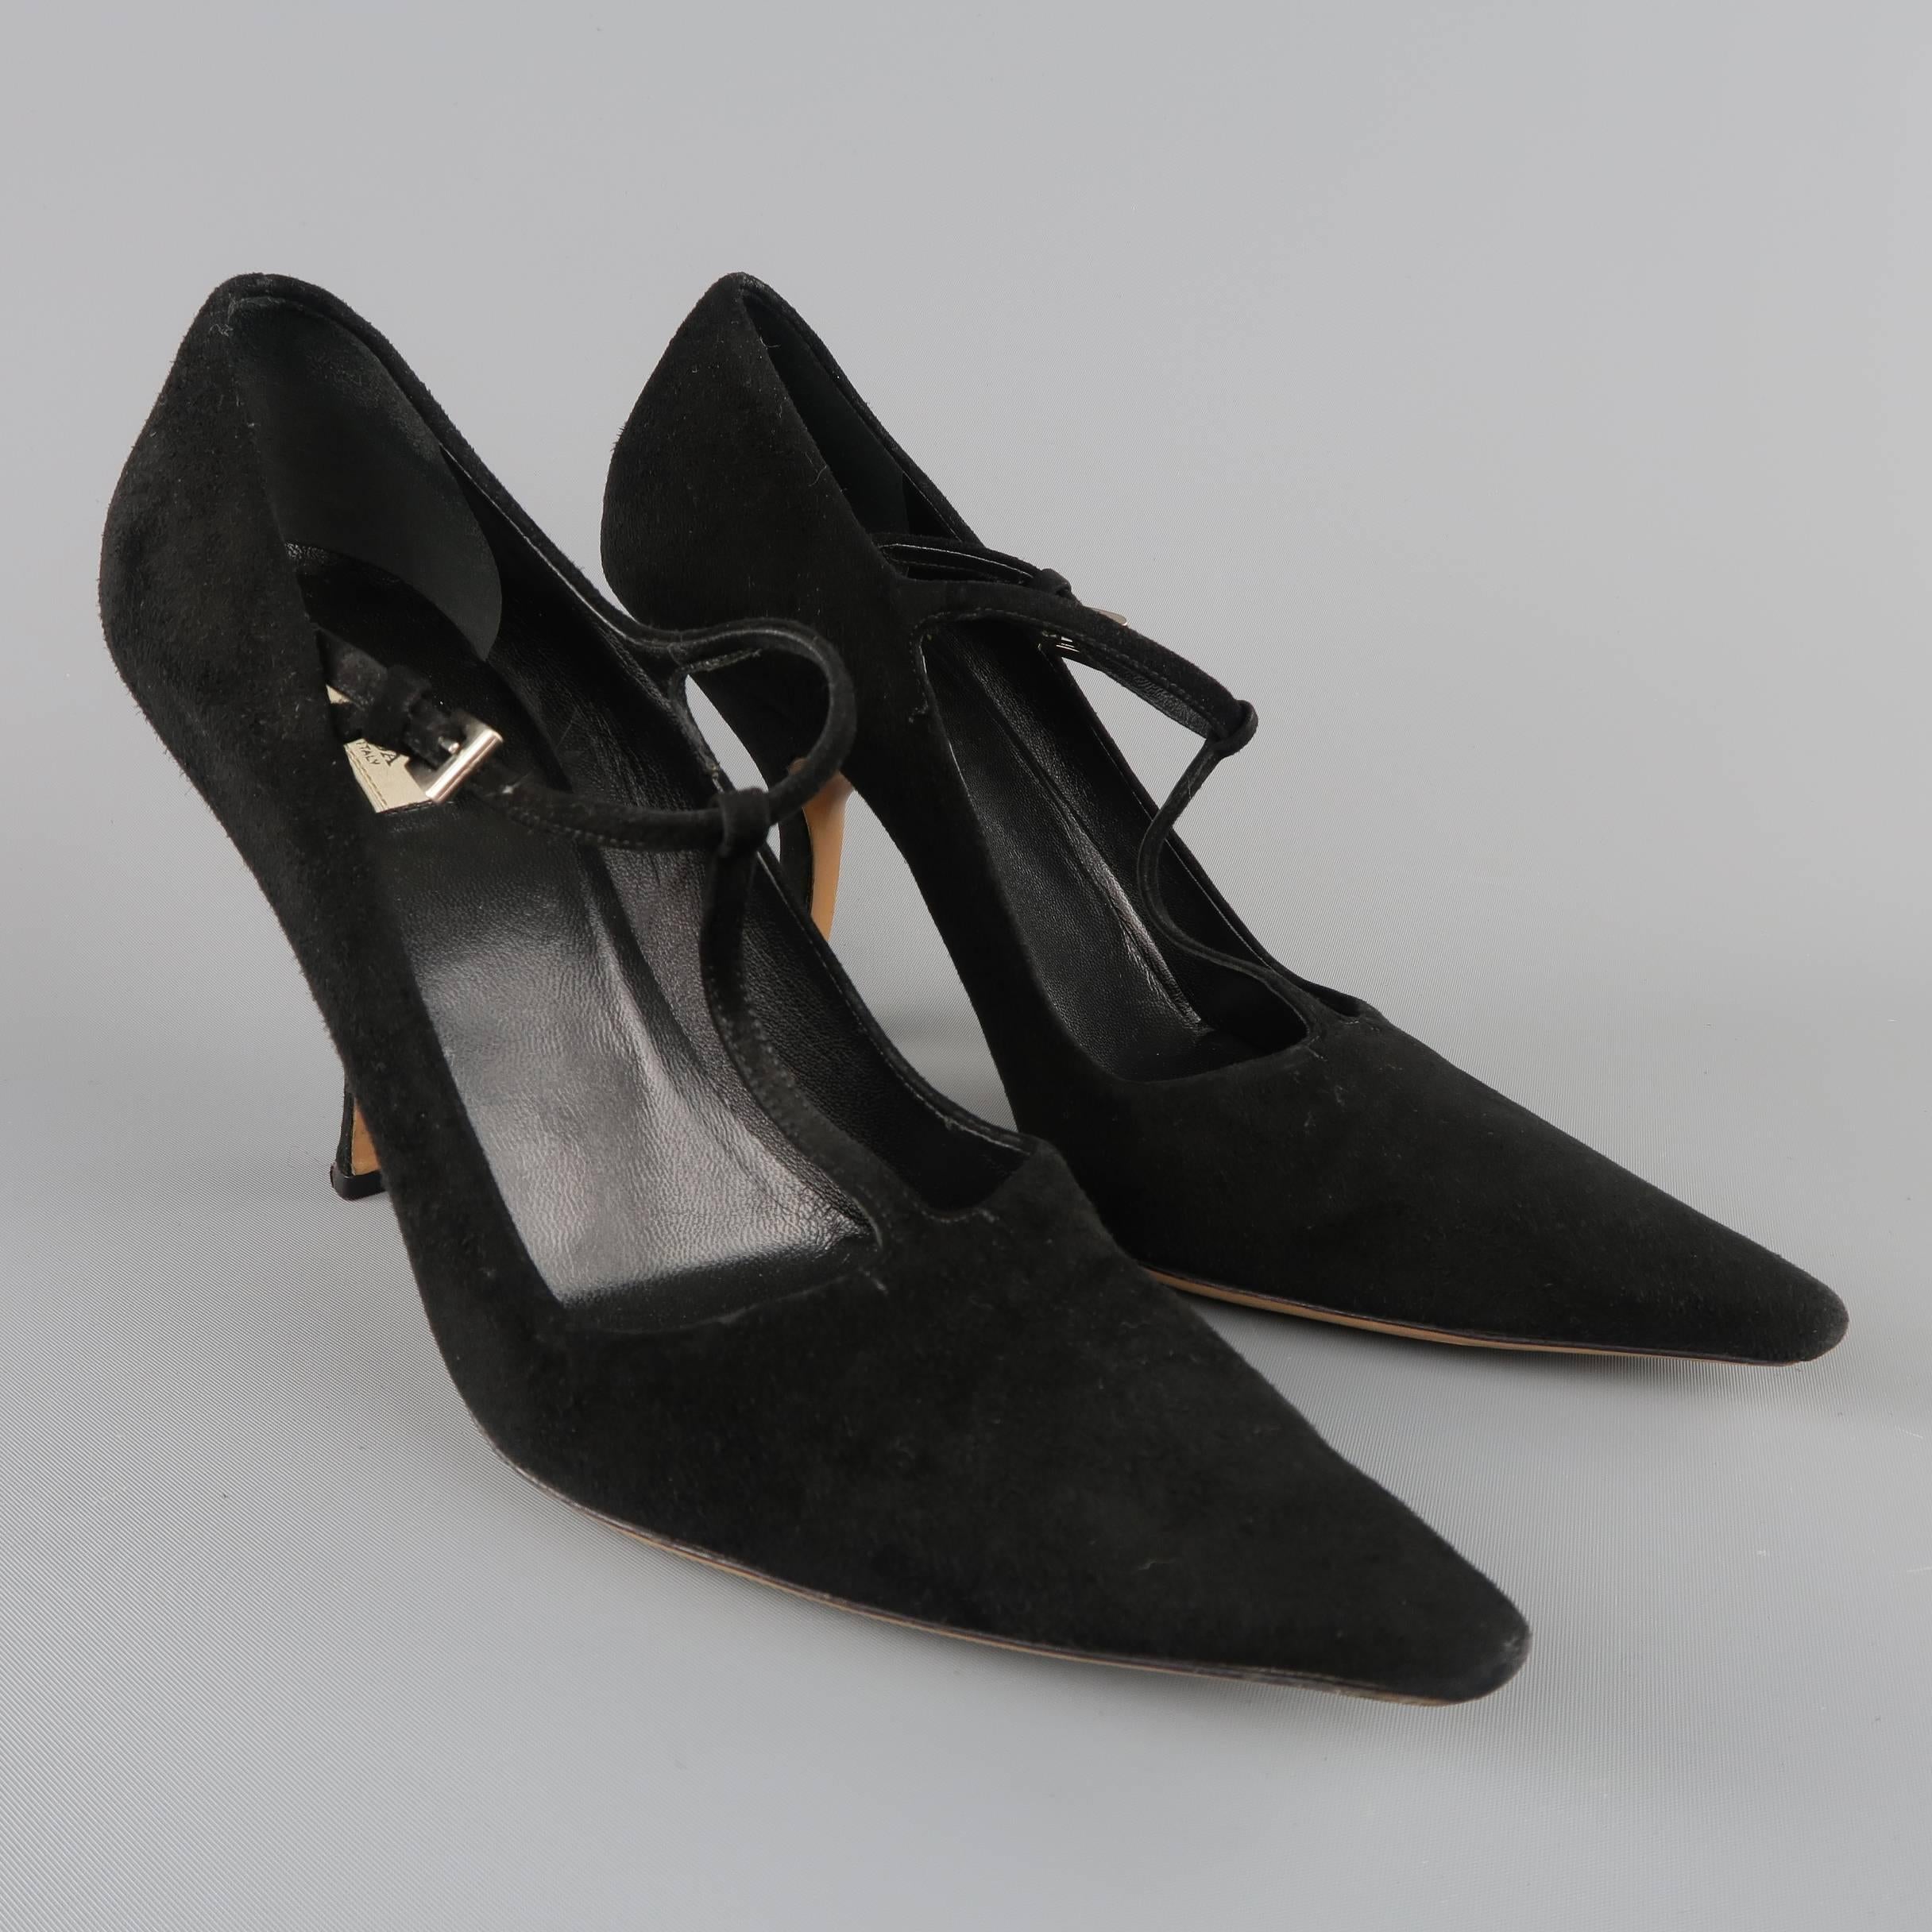 PRADA pumps come in black suede and feature a pointed toe, T strap with silver tone buckle, and unique angular curved heel. Made in Italy.
 
Good Pre-Owned Condition.
Marked: IT 38
 
Heel: 3.5 in.

SKU: 84283